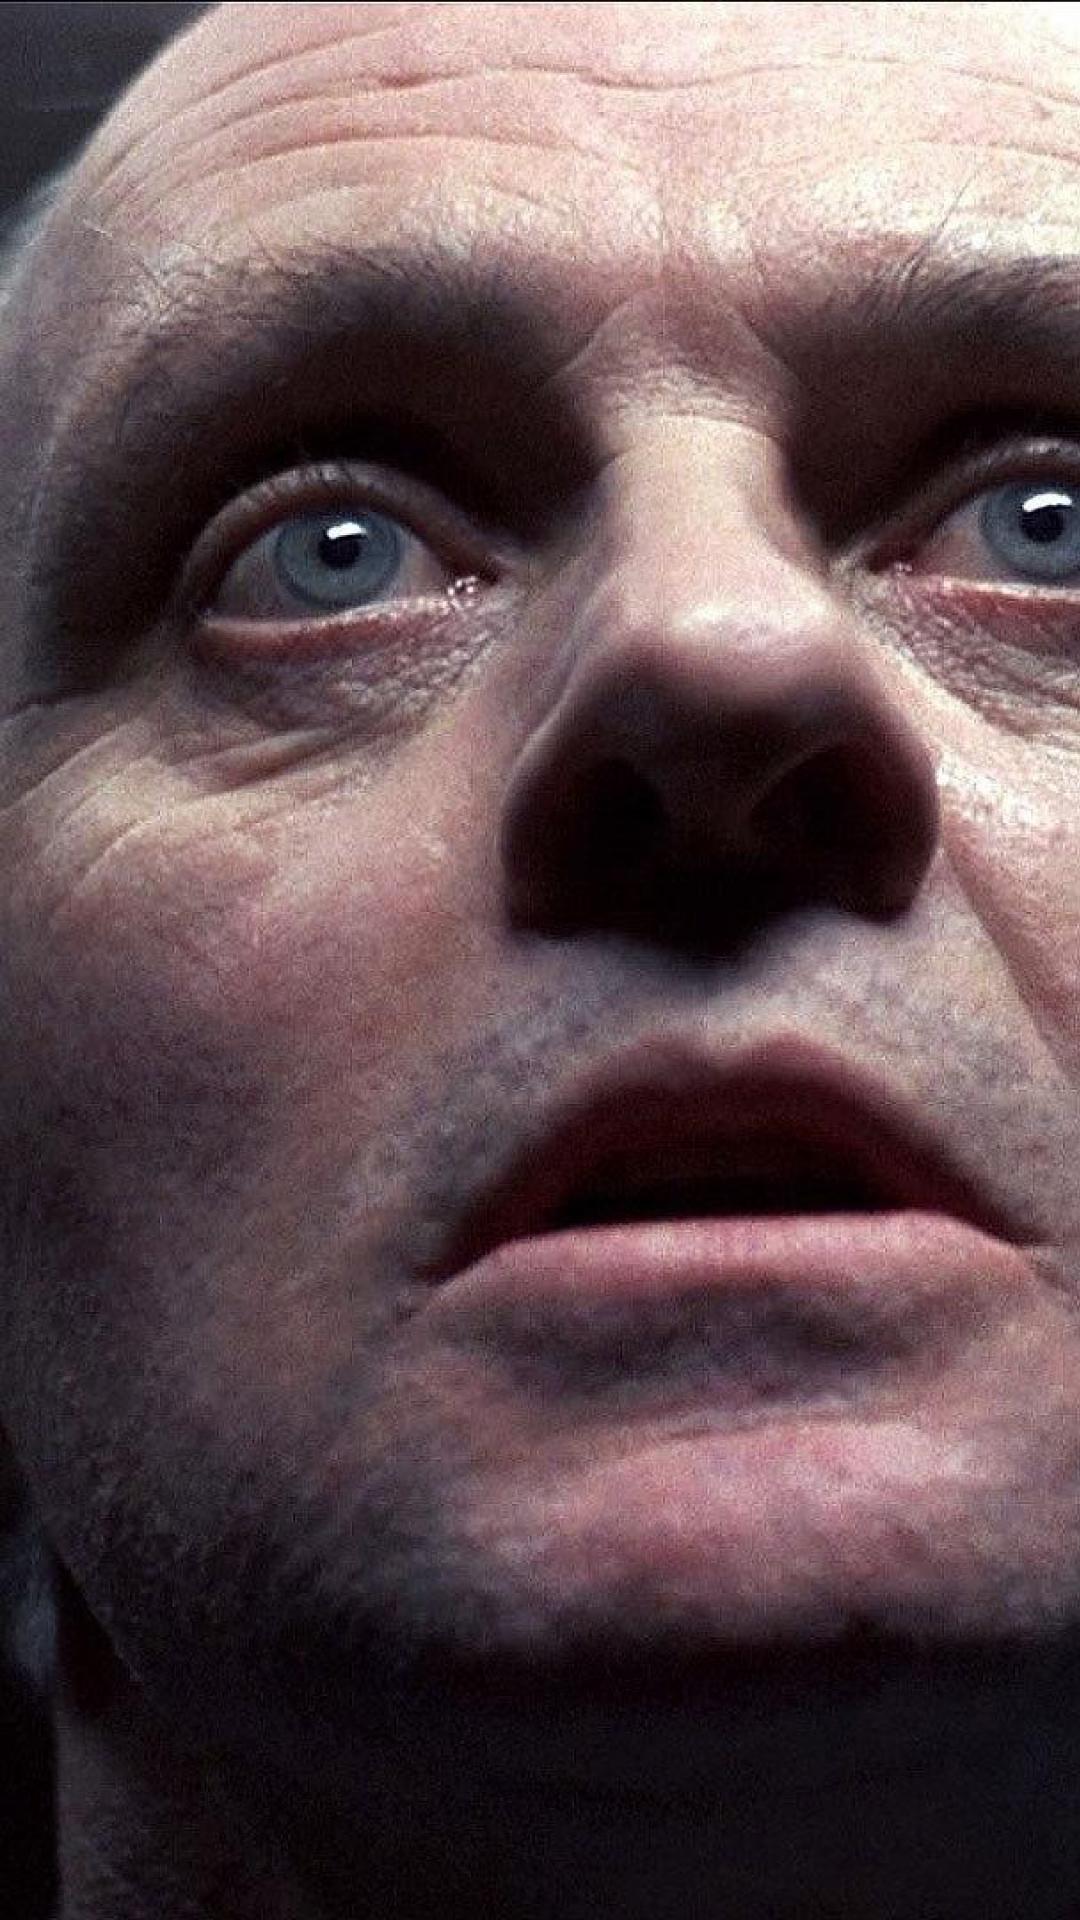 Silence of the lambs wallpapers Gallery